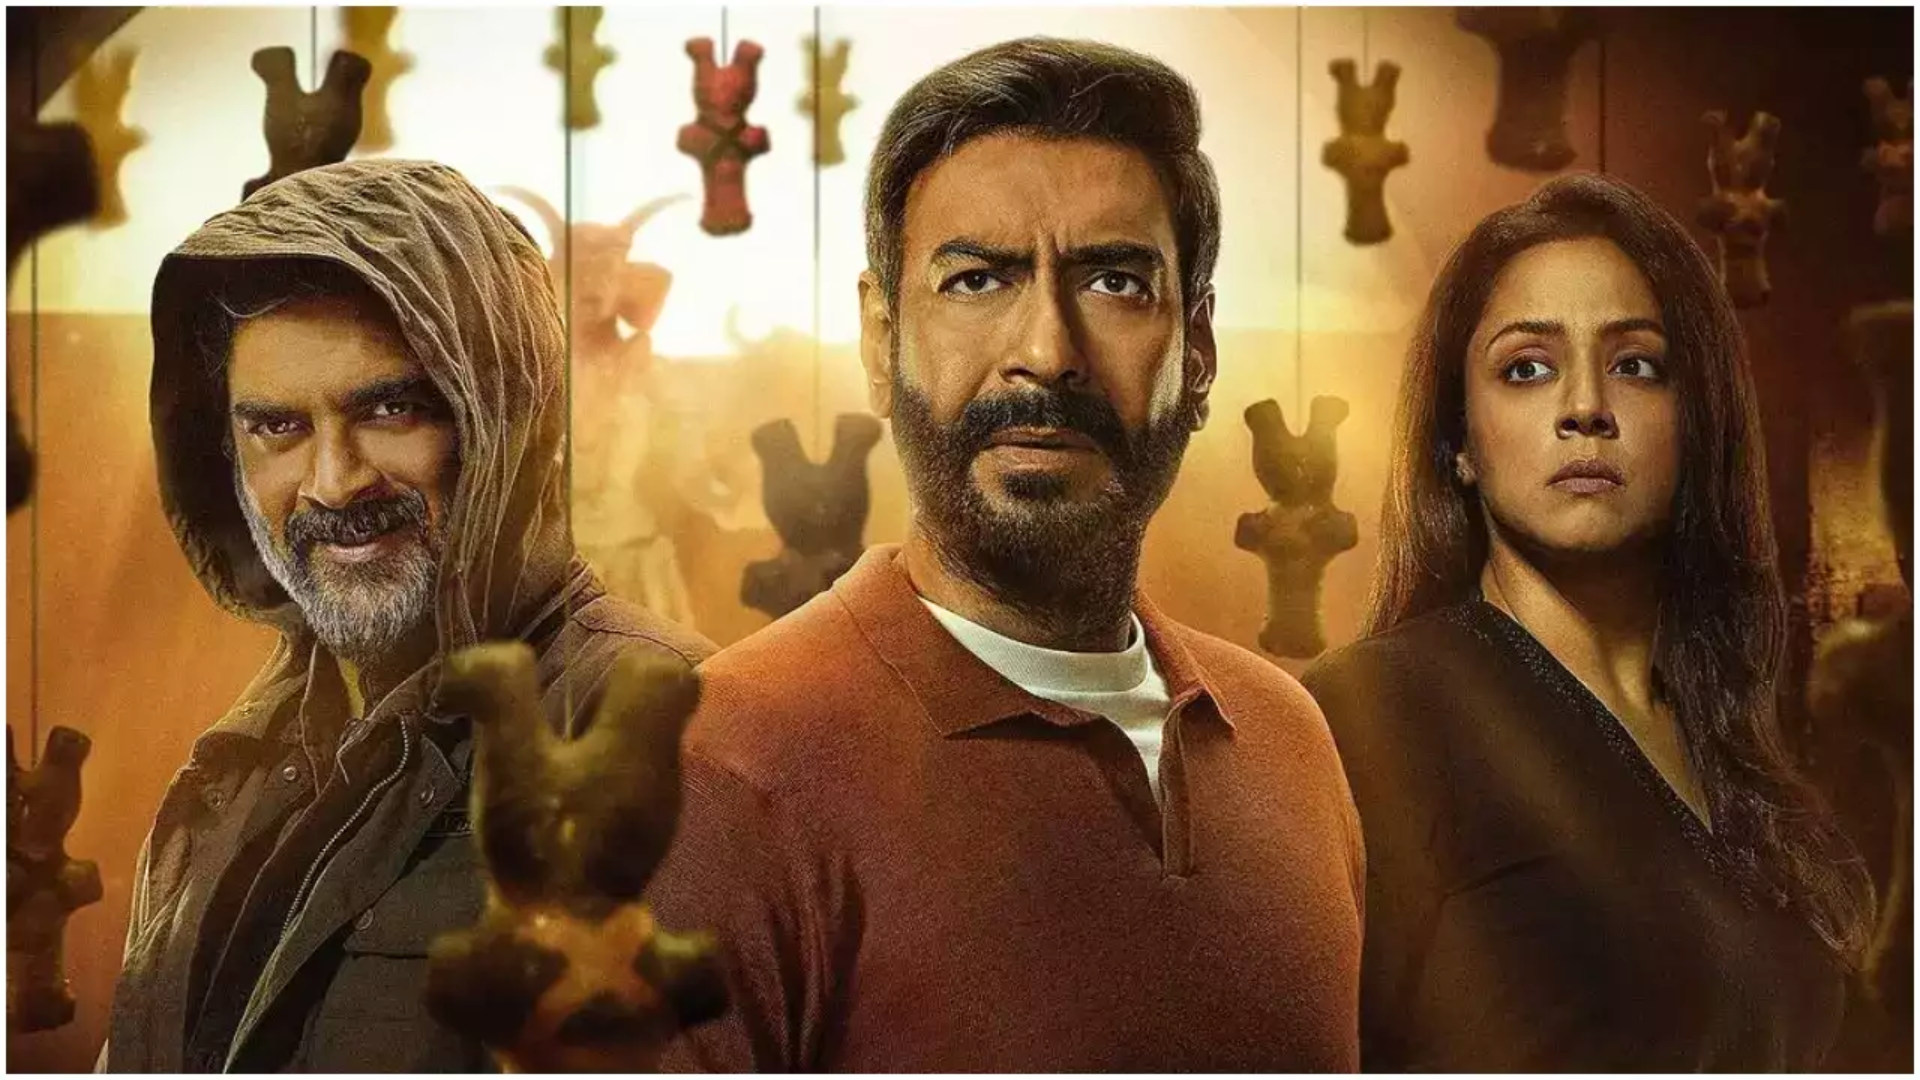 ‘Shaitaan’ Box Office Collection Update: Ajay Devgn Film Inches Closer to Rs 100 Crore-mark in India